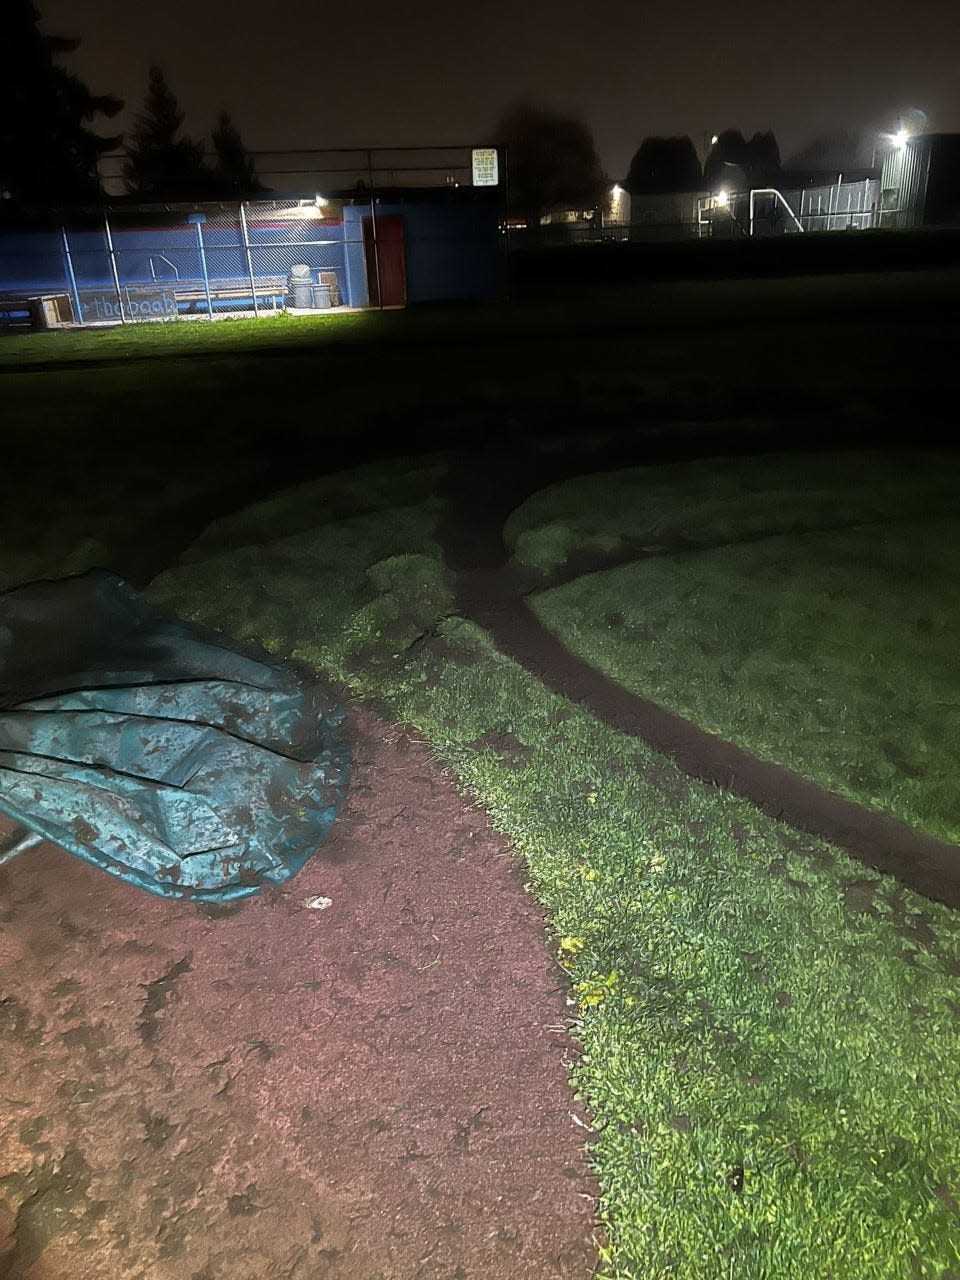 Gilmore Field was vandalized Monday night.